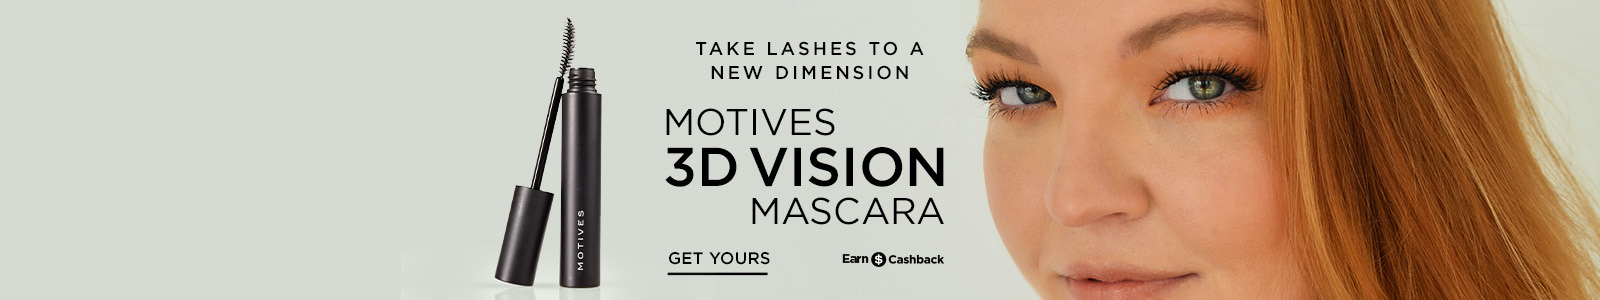 Motives 3D Vision Mascara Take Lashes to a New Dimension Get Yours 